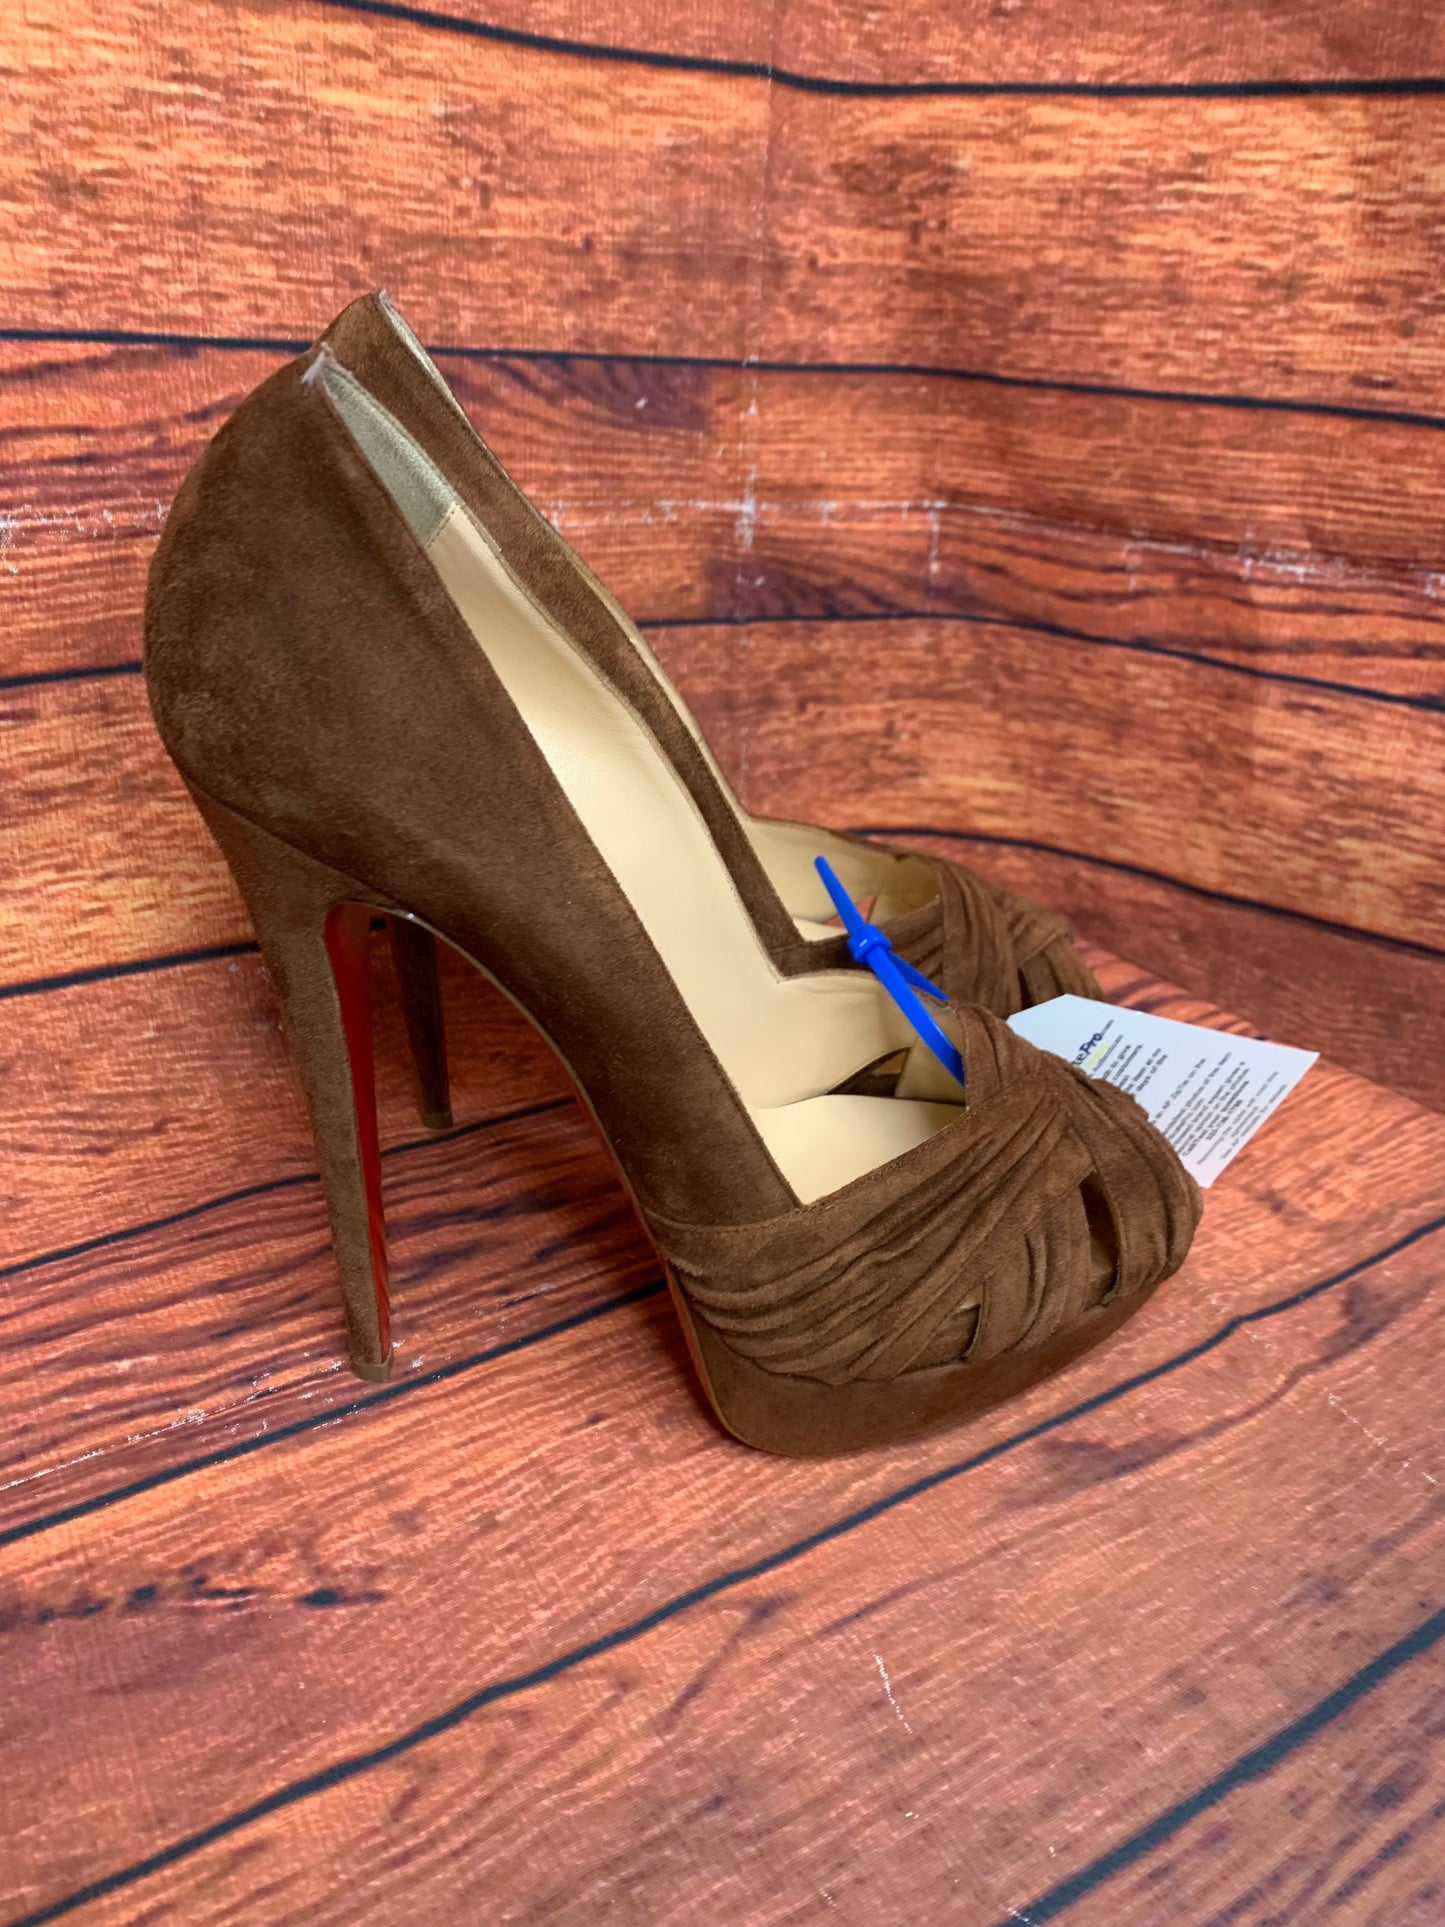 Shoes Heels Stiletto By Christian Louboutin  Size: 10